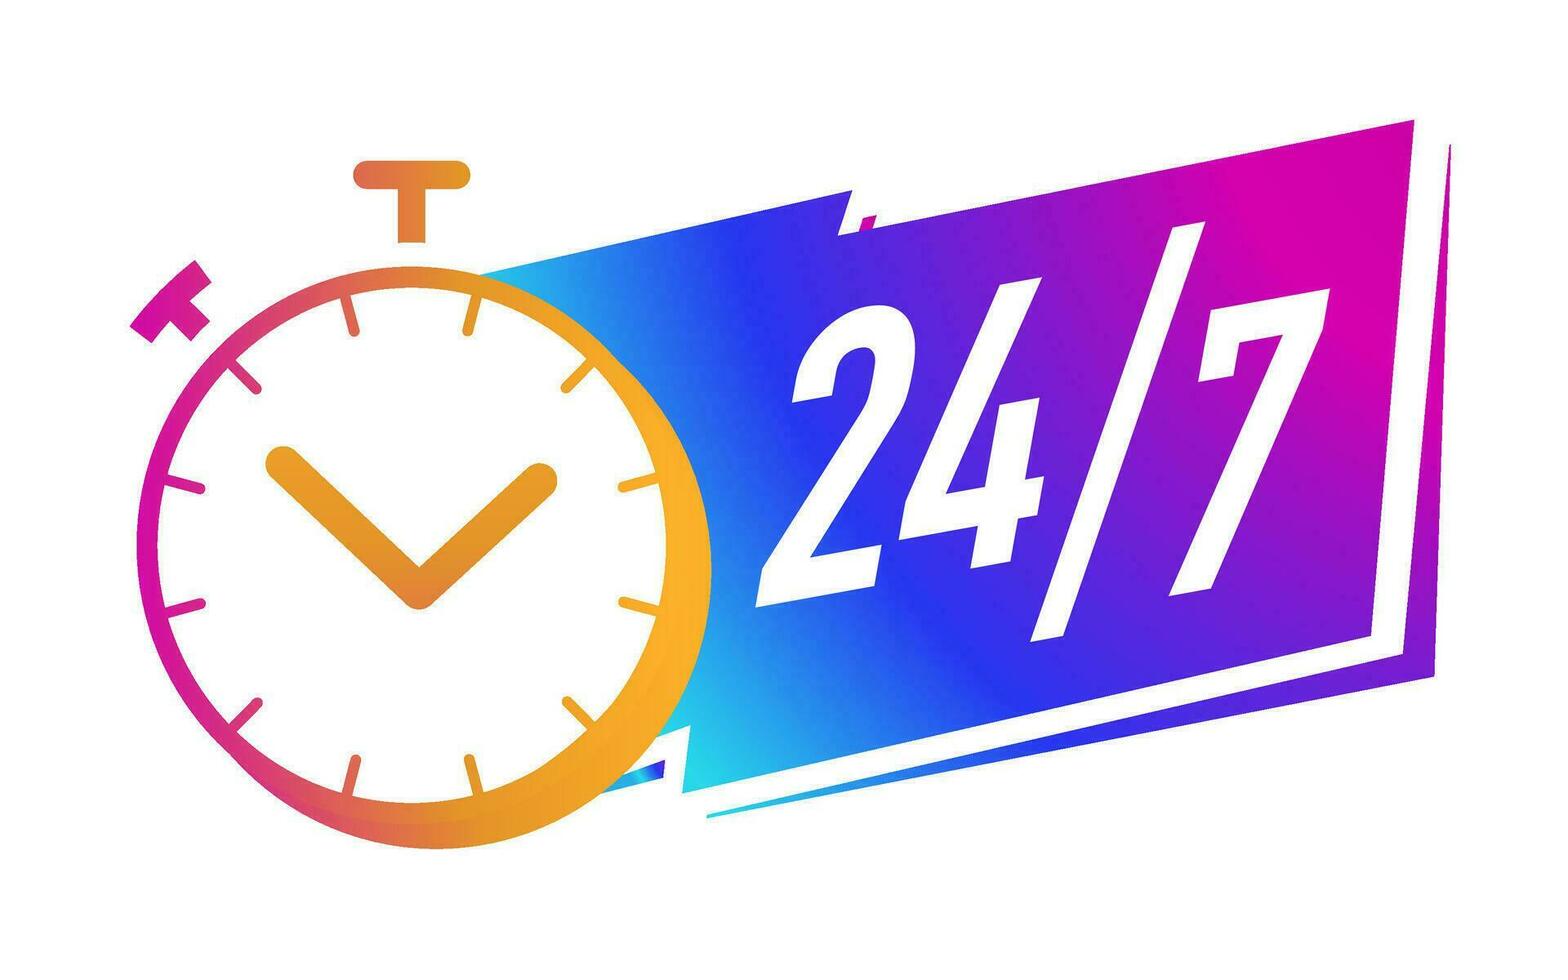 24 7 hours timer symbol gradient color style vector